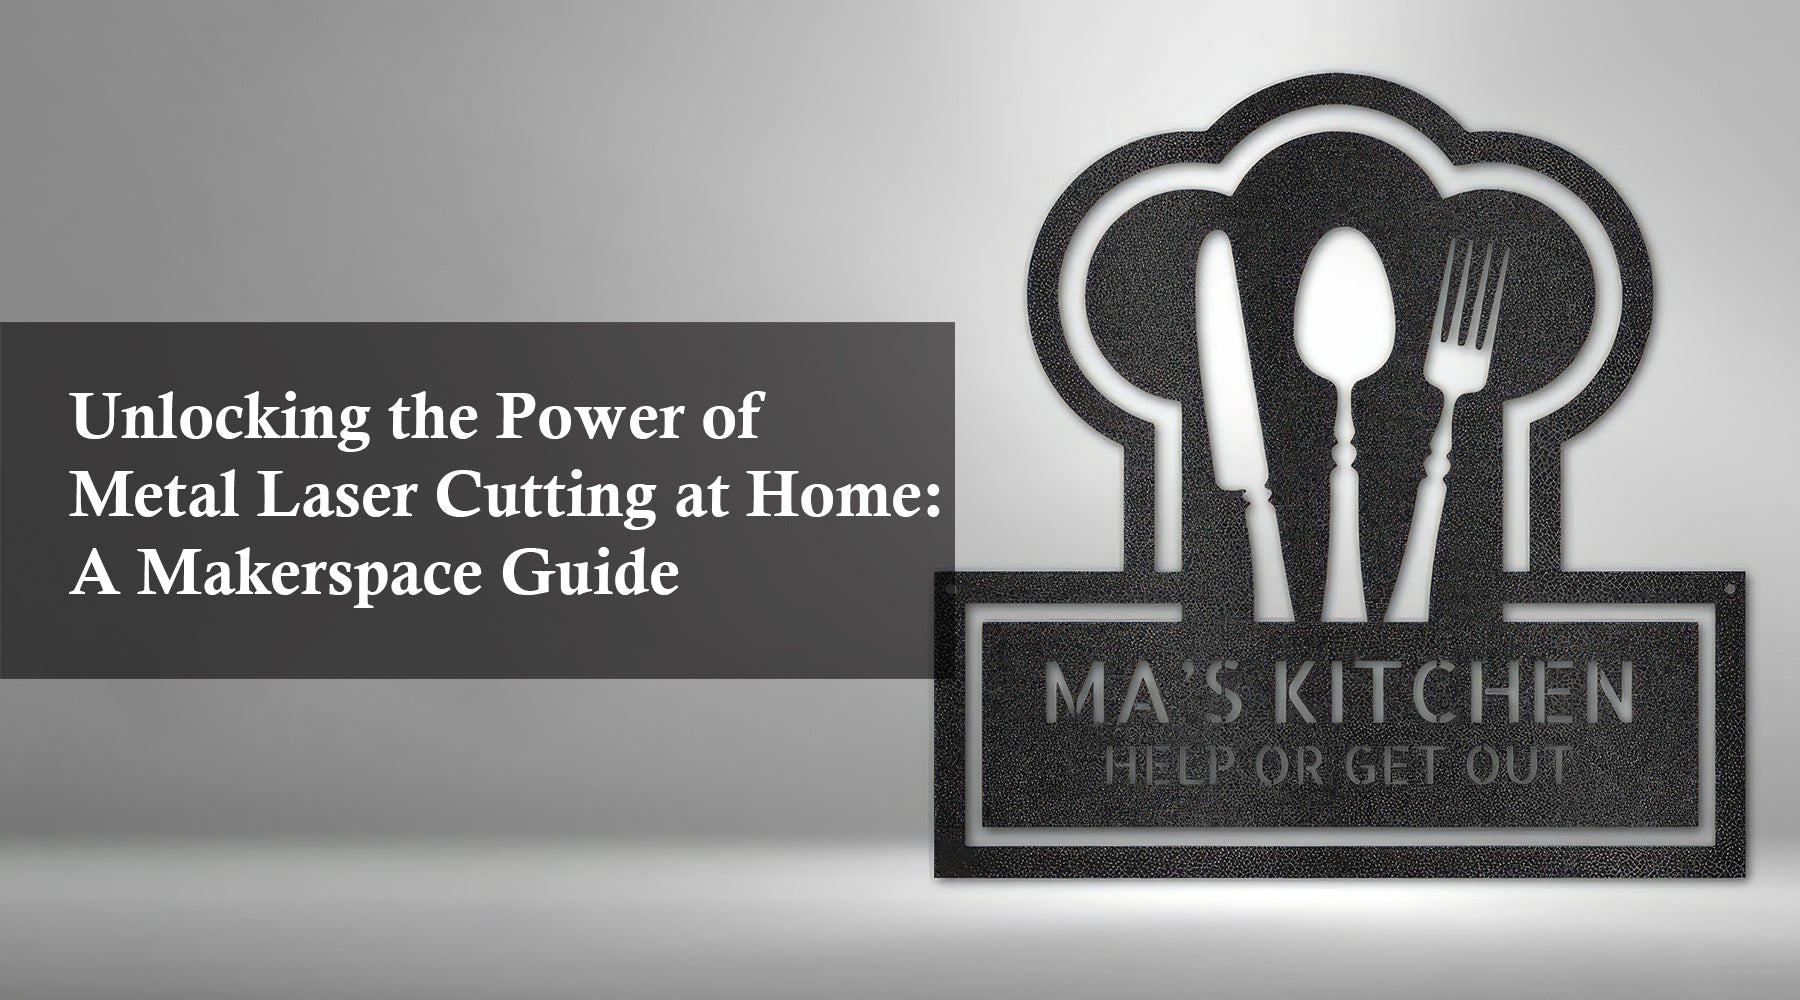 Unlocking the Power of Metal Laser Cutting at Home: A Makerspace Guide